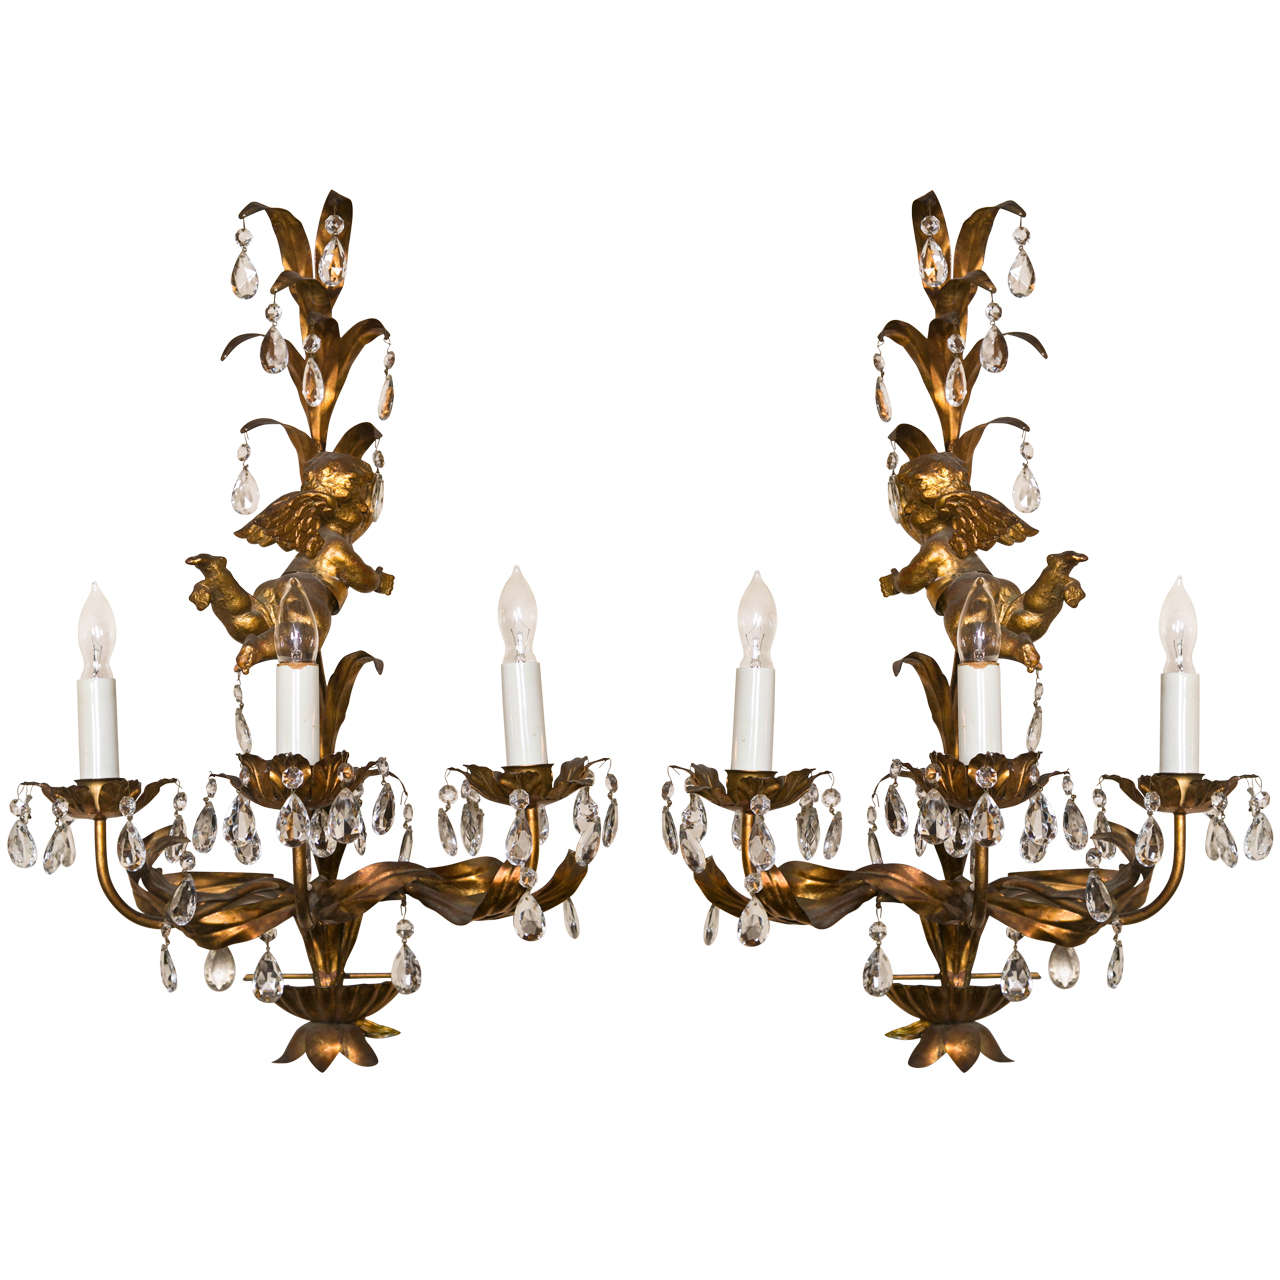 French Marie Therese Style Gilt-Brass Three-Light Wall Sconces Cherub Figures For Sale